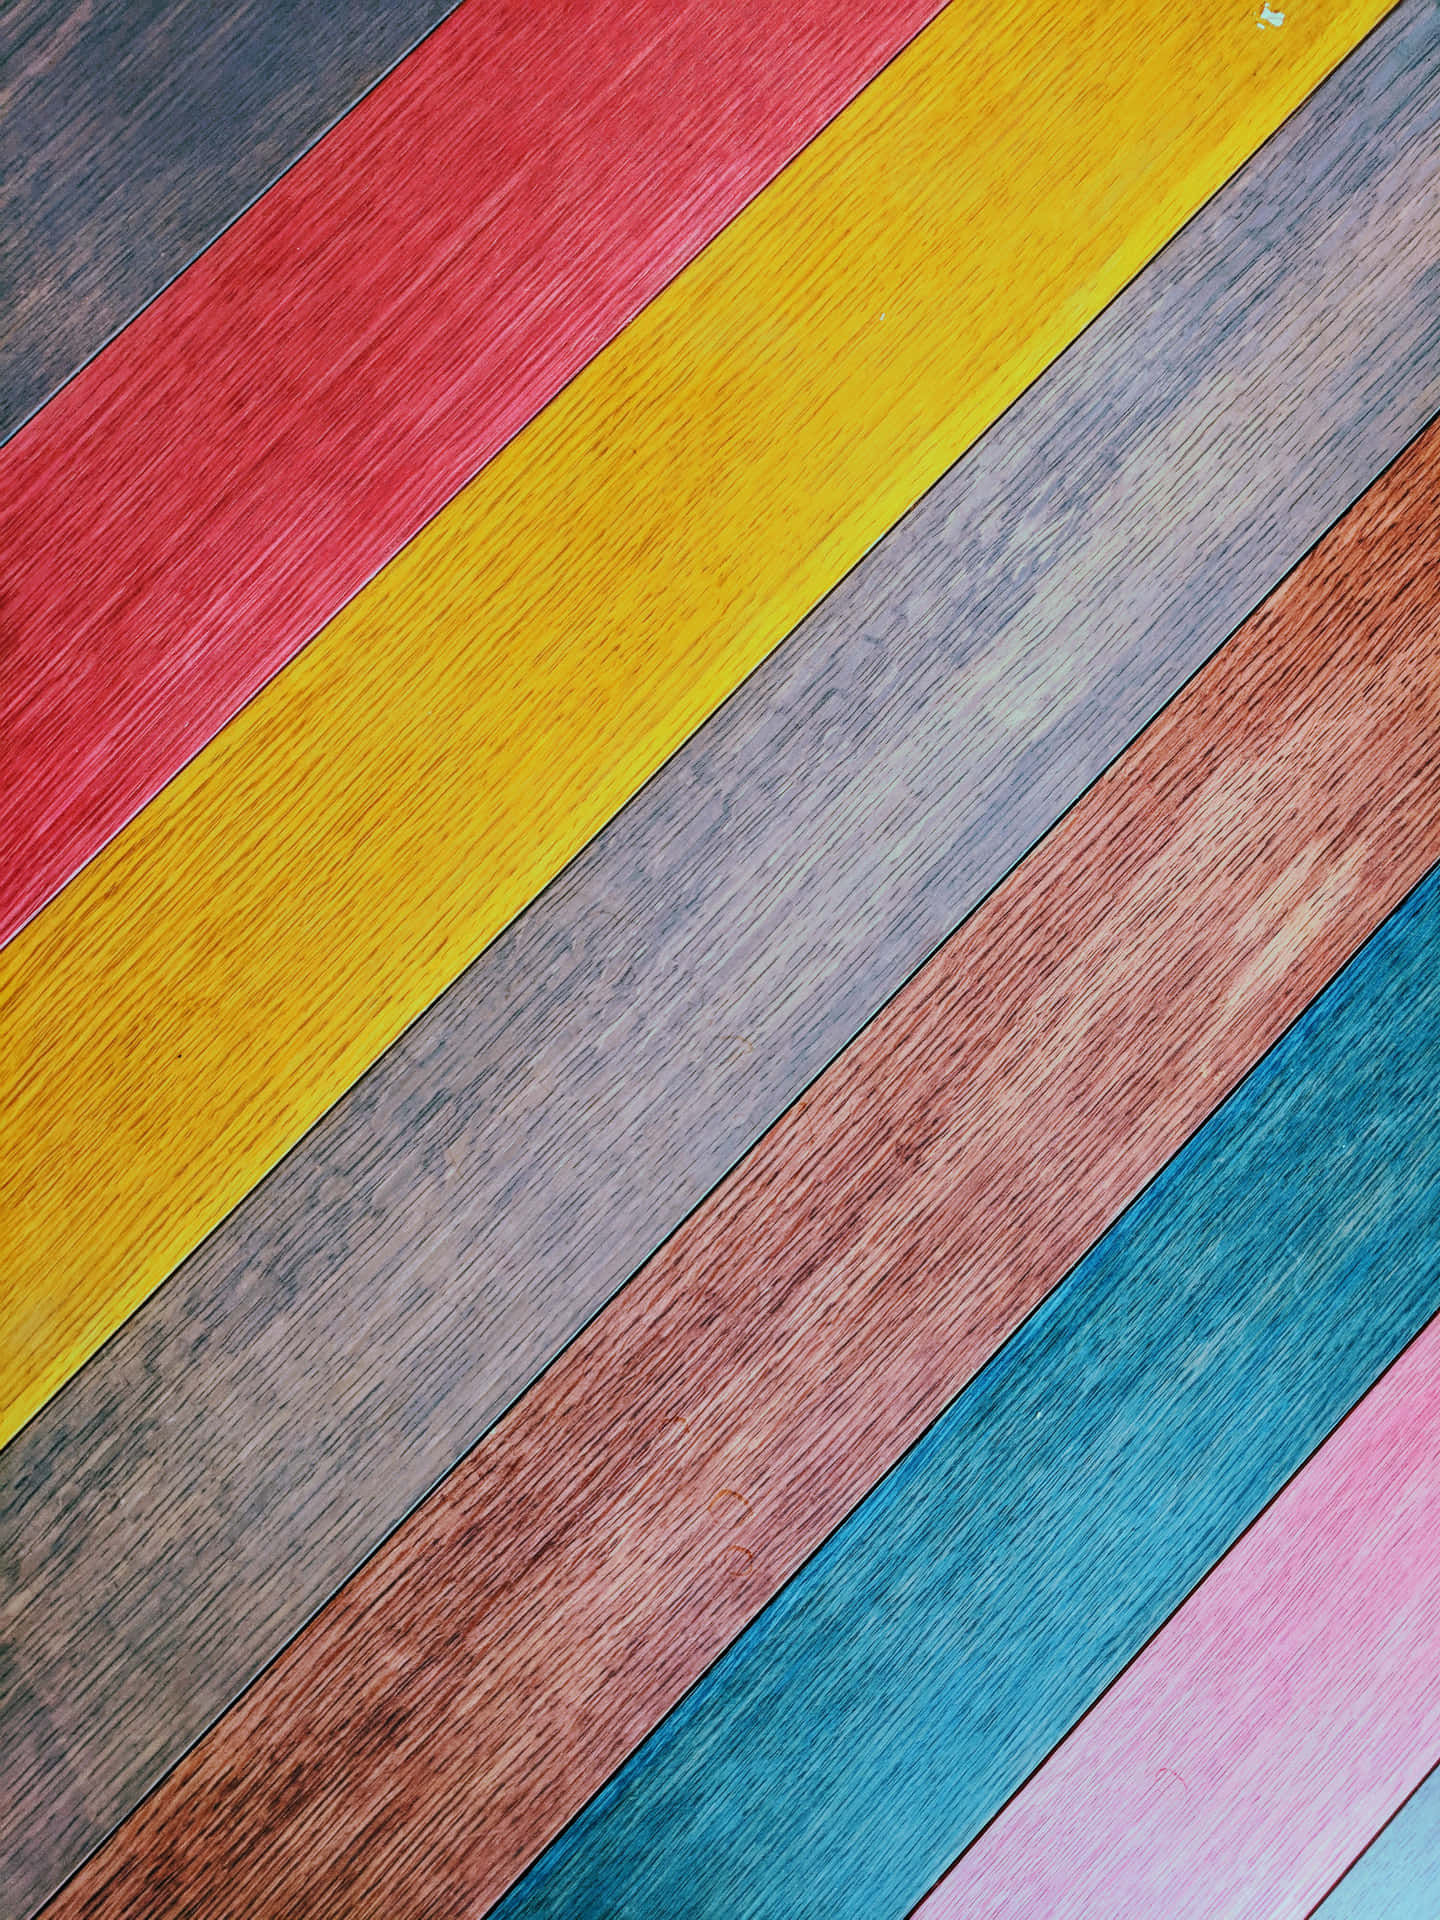 A Wooden Bench With A Colorful Pattern